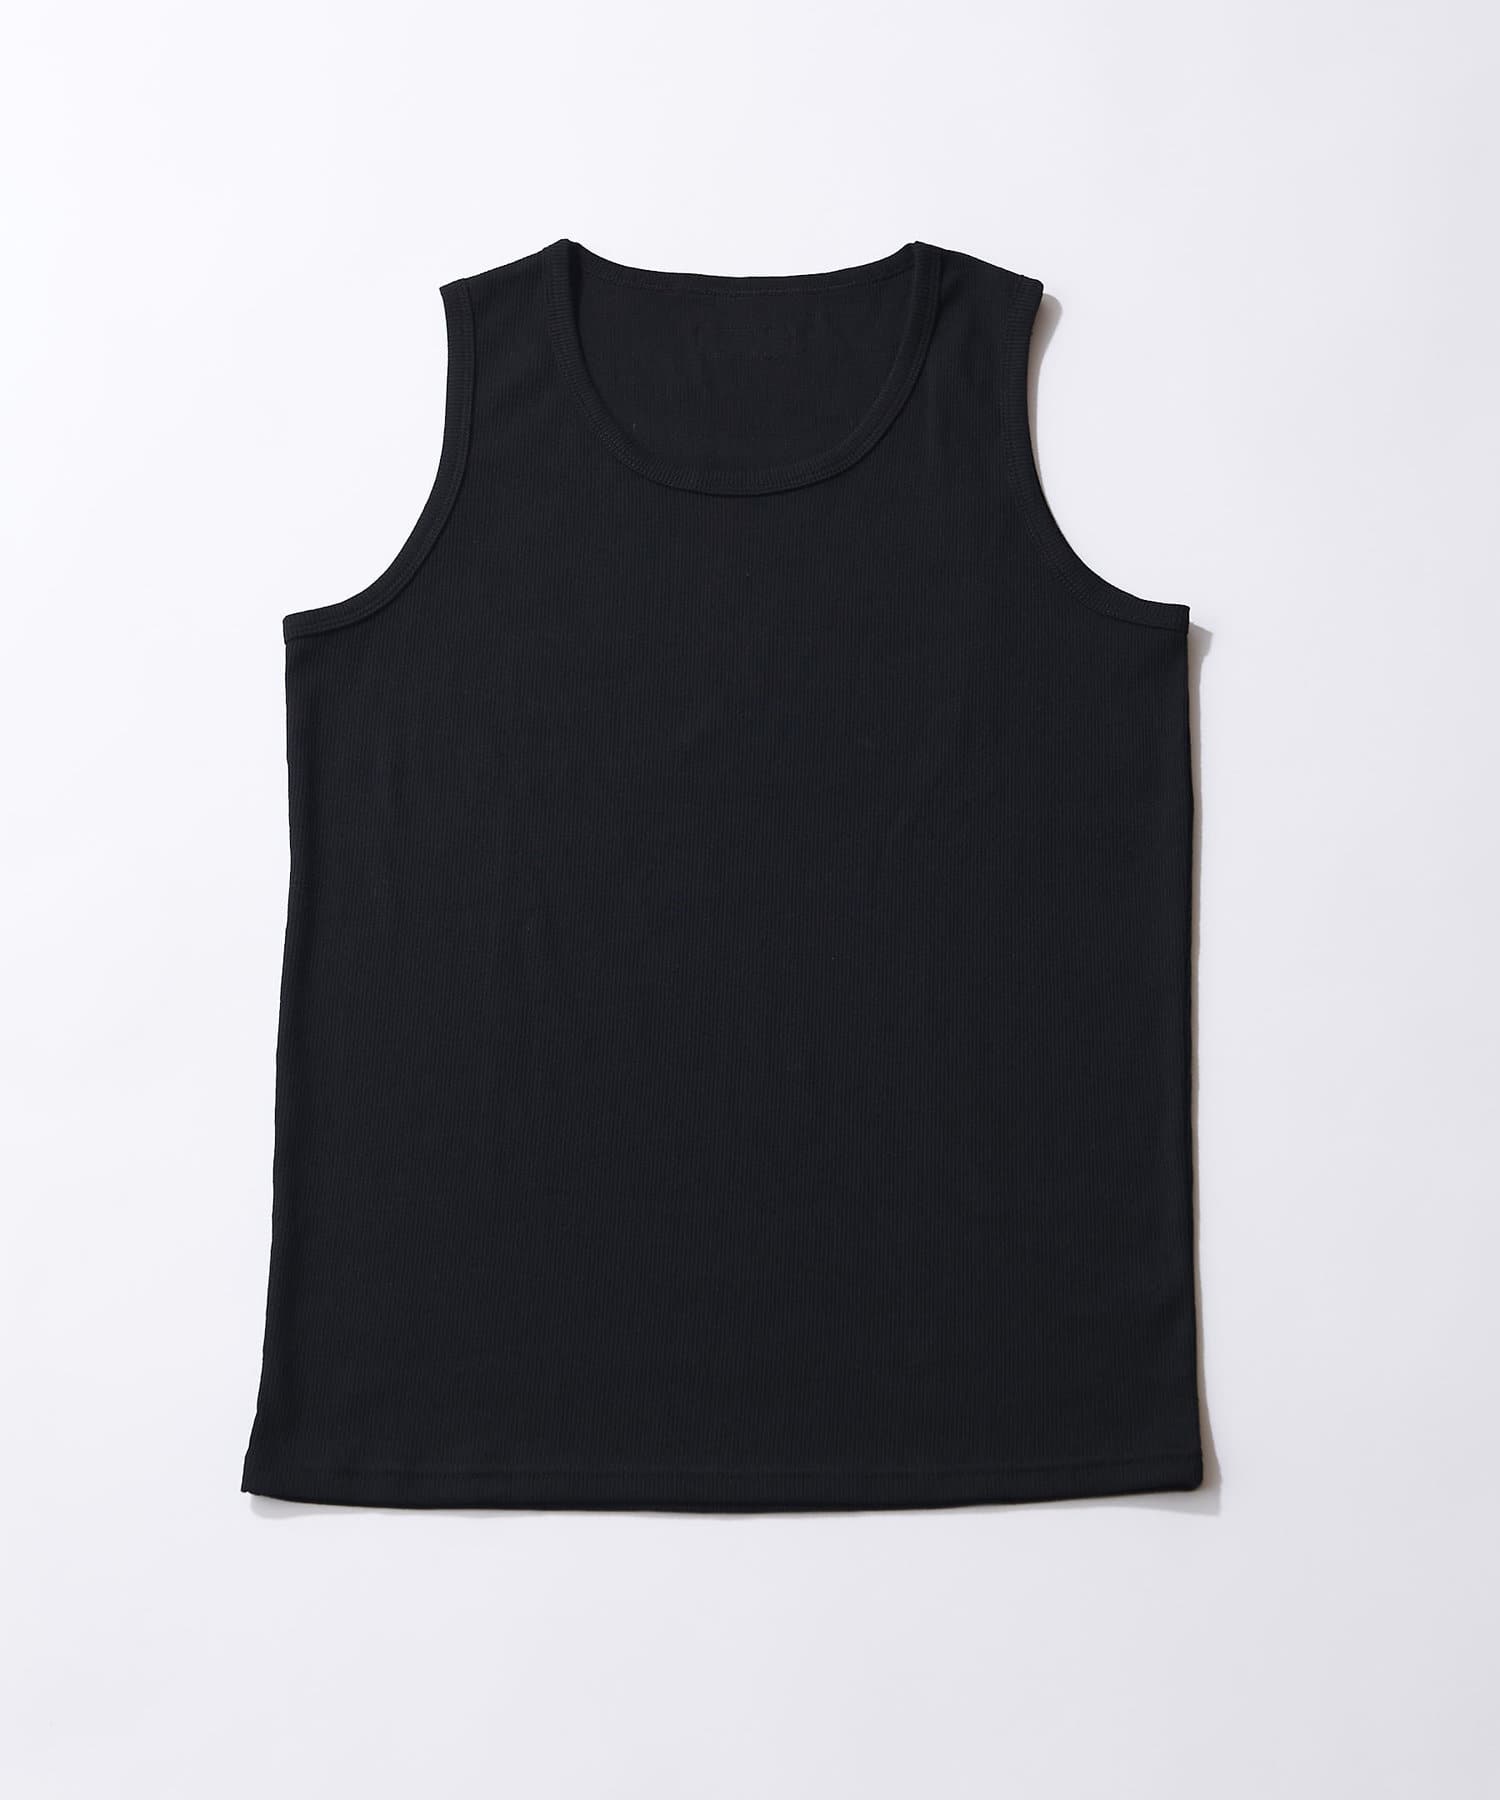 Lui's(ルイス) Ah for Lui's / for TANKTOP (タンクトップ)